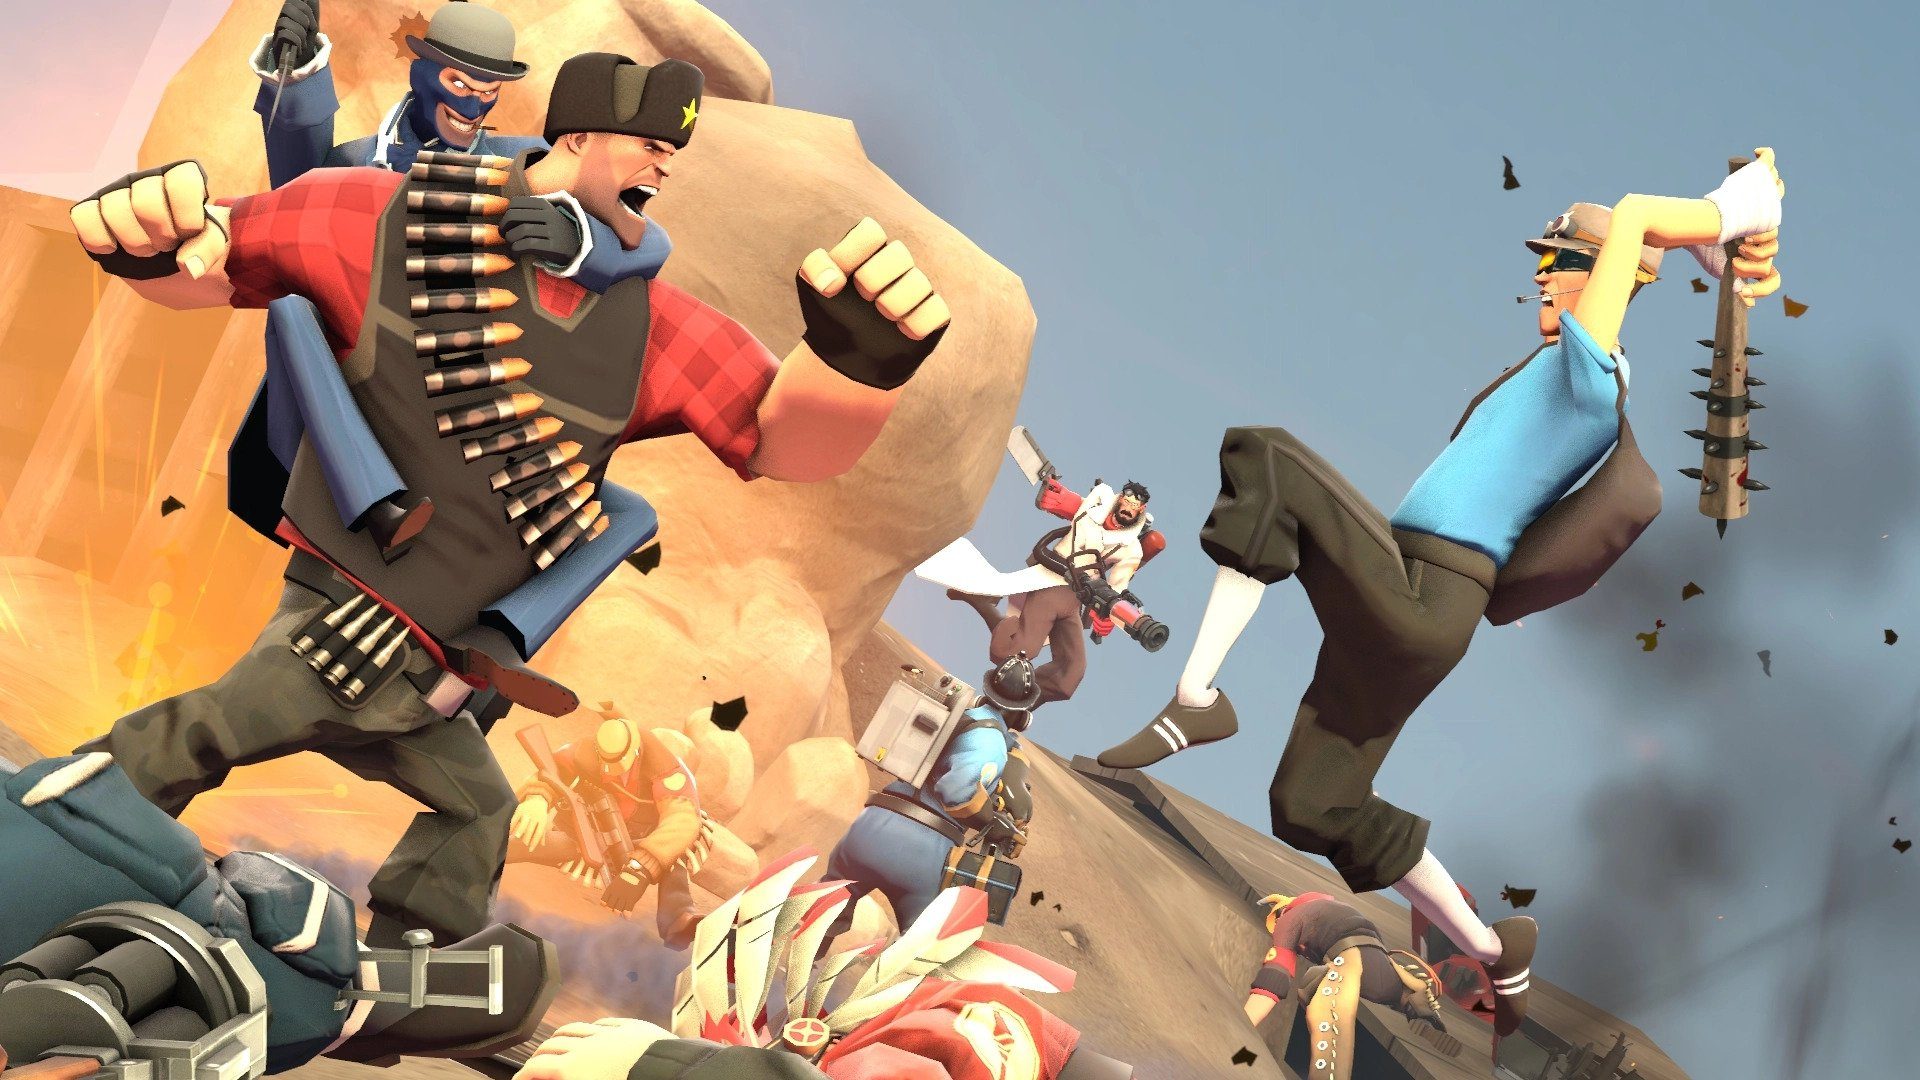 61 GB Of Team Fortress 2 Assets Leak, Reveals Unused Maps and Models